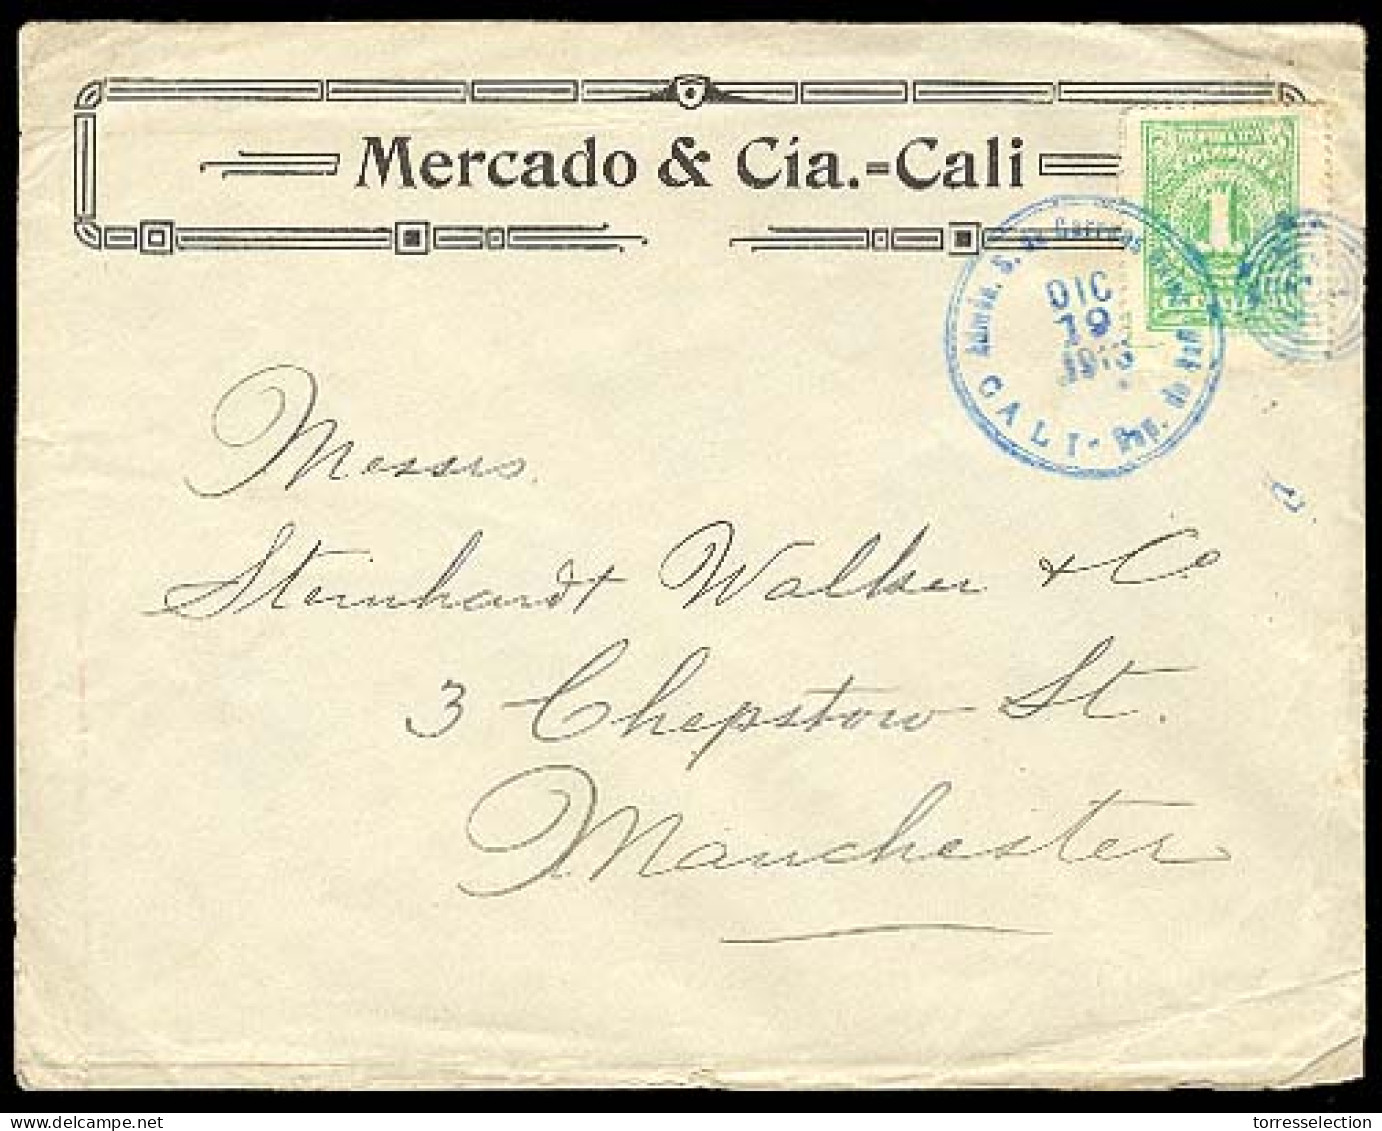 COLOMBIA. 1913 (Dec. 19). Sc. 315. Cali To Manchester, UK. Printed Matter Rate Envelope. VF. - Colombia